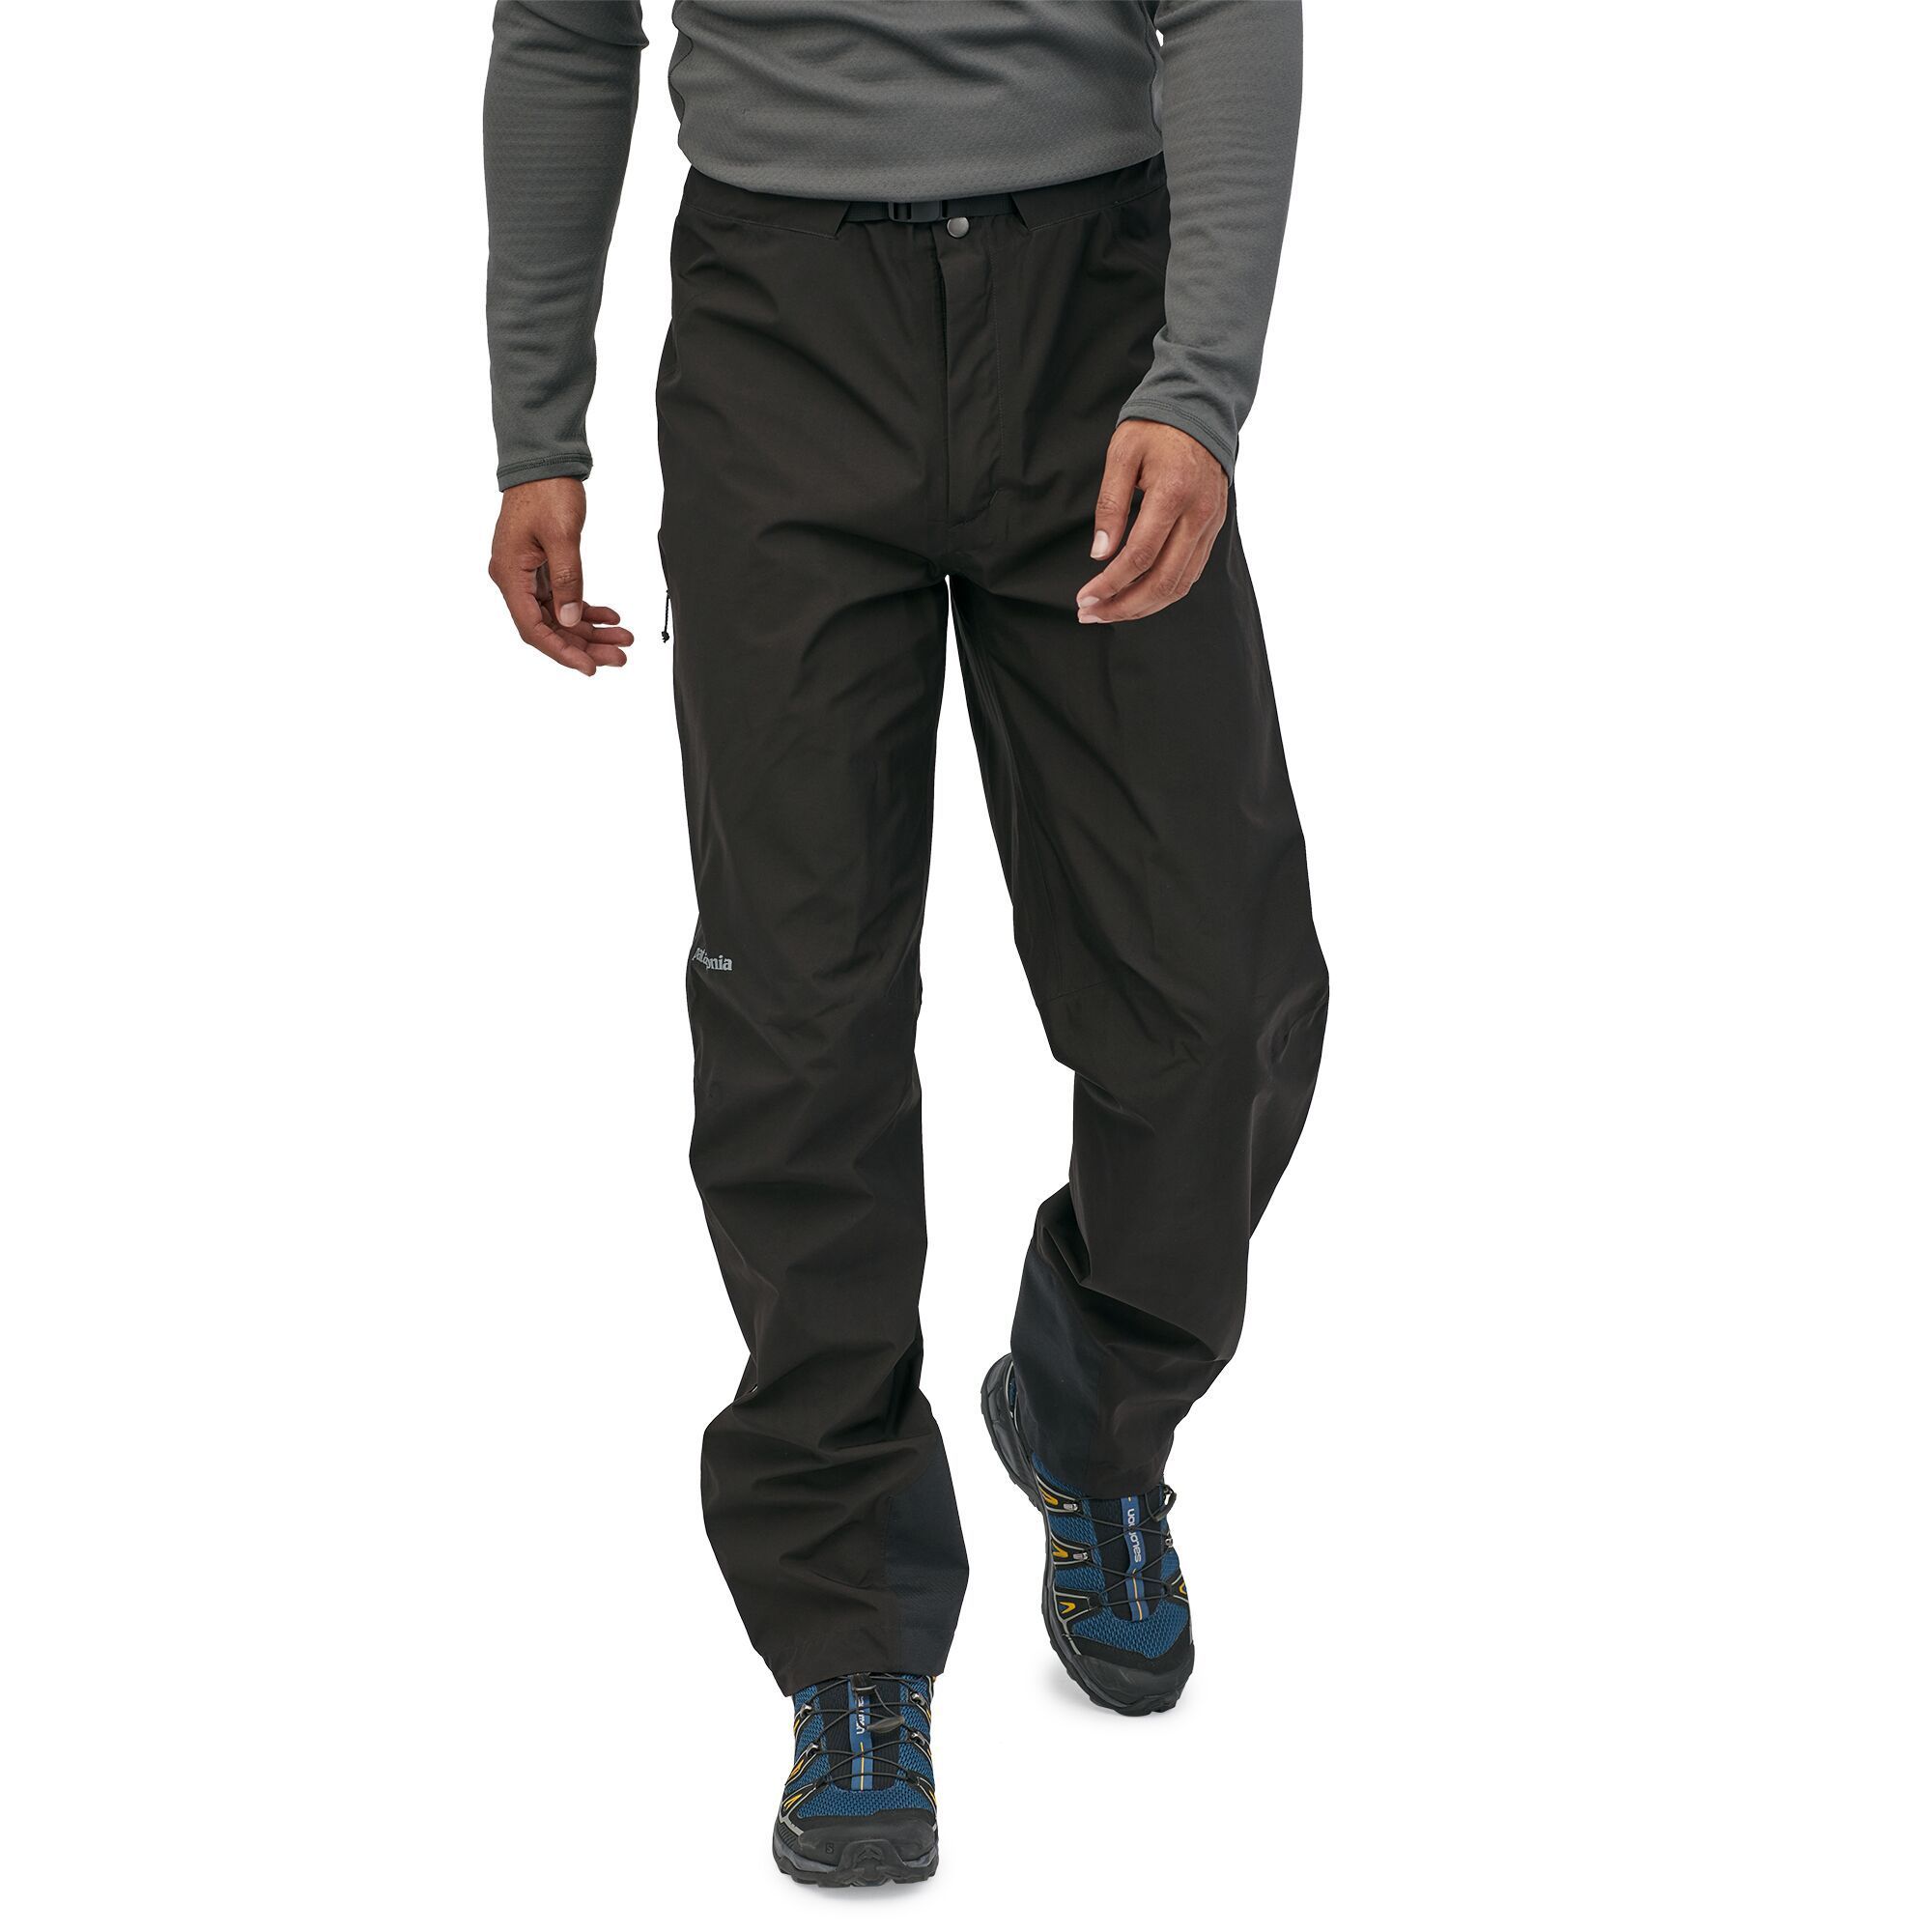 Patagonia Men's Calcite Pants - Recycled Polyester, Black / S